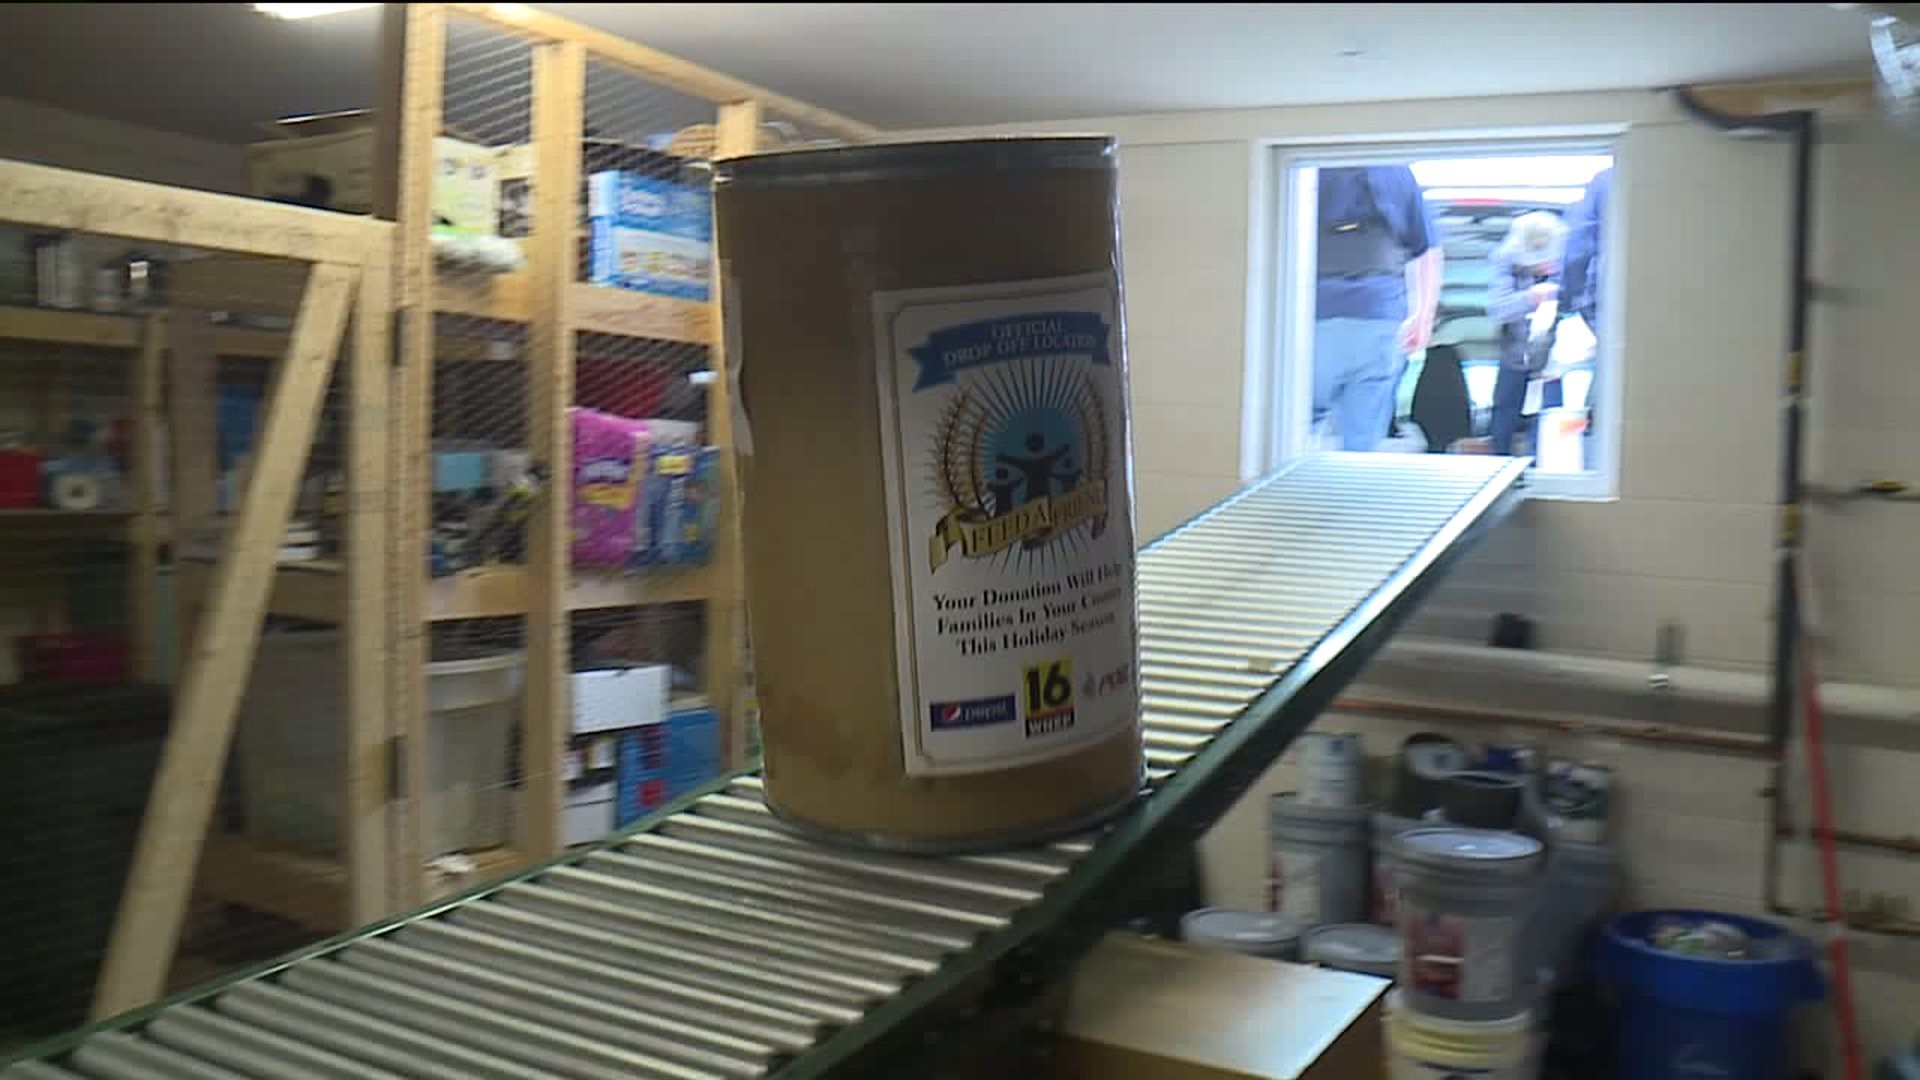 A Look at How Feed a Friend Supplies Are Gathered